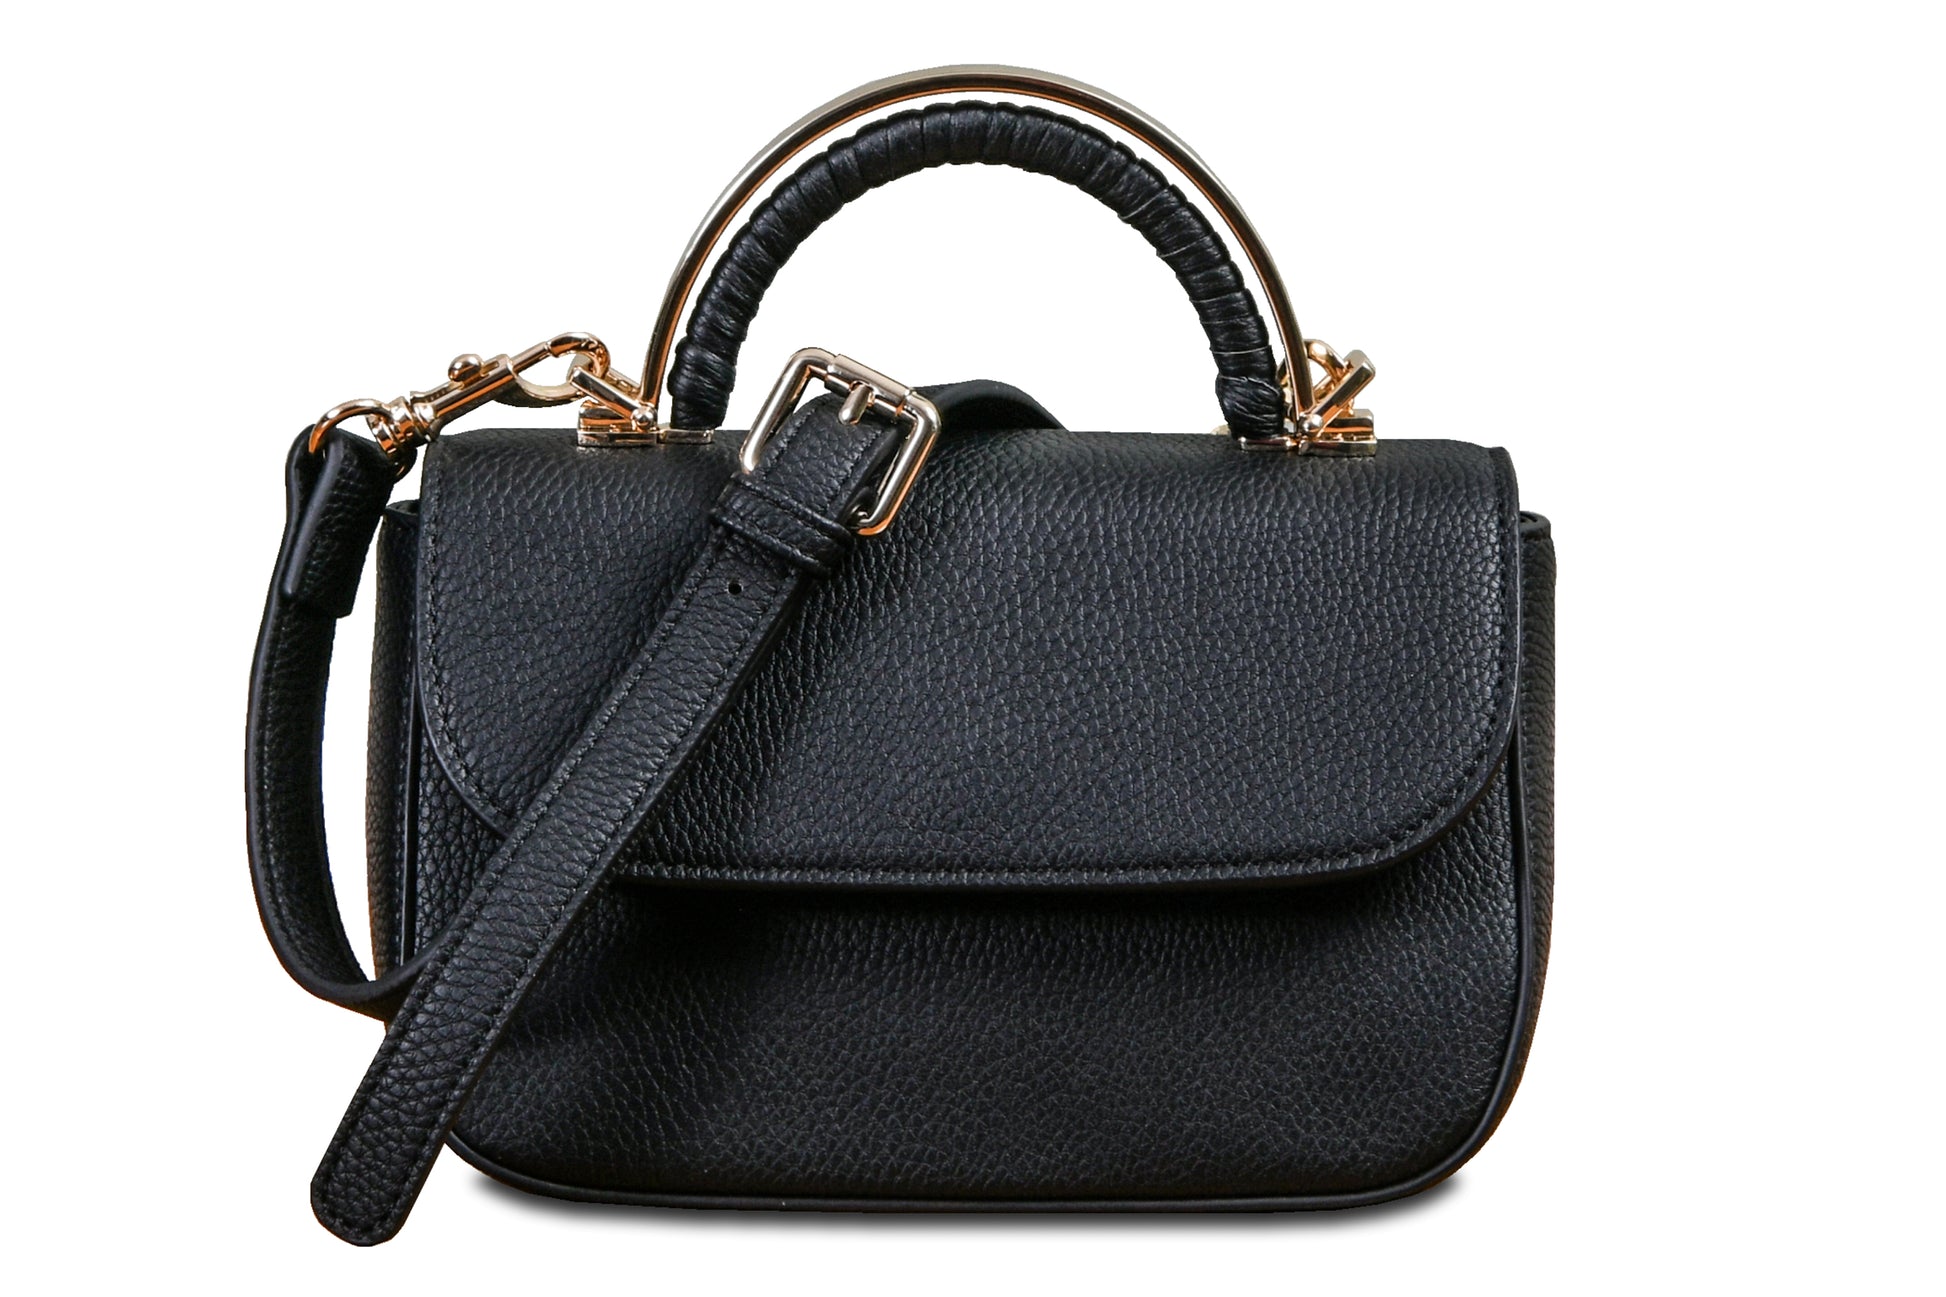 Mini Crossbody Pebble Grain Faux Leather Midnight Black Handbag made by Dewi Maya front view available at the best boutique in Upstate South Carolina Spartanburg Greenville Dewi Maya Boutique